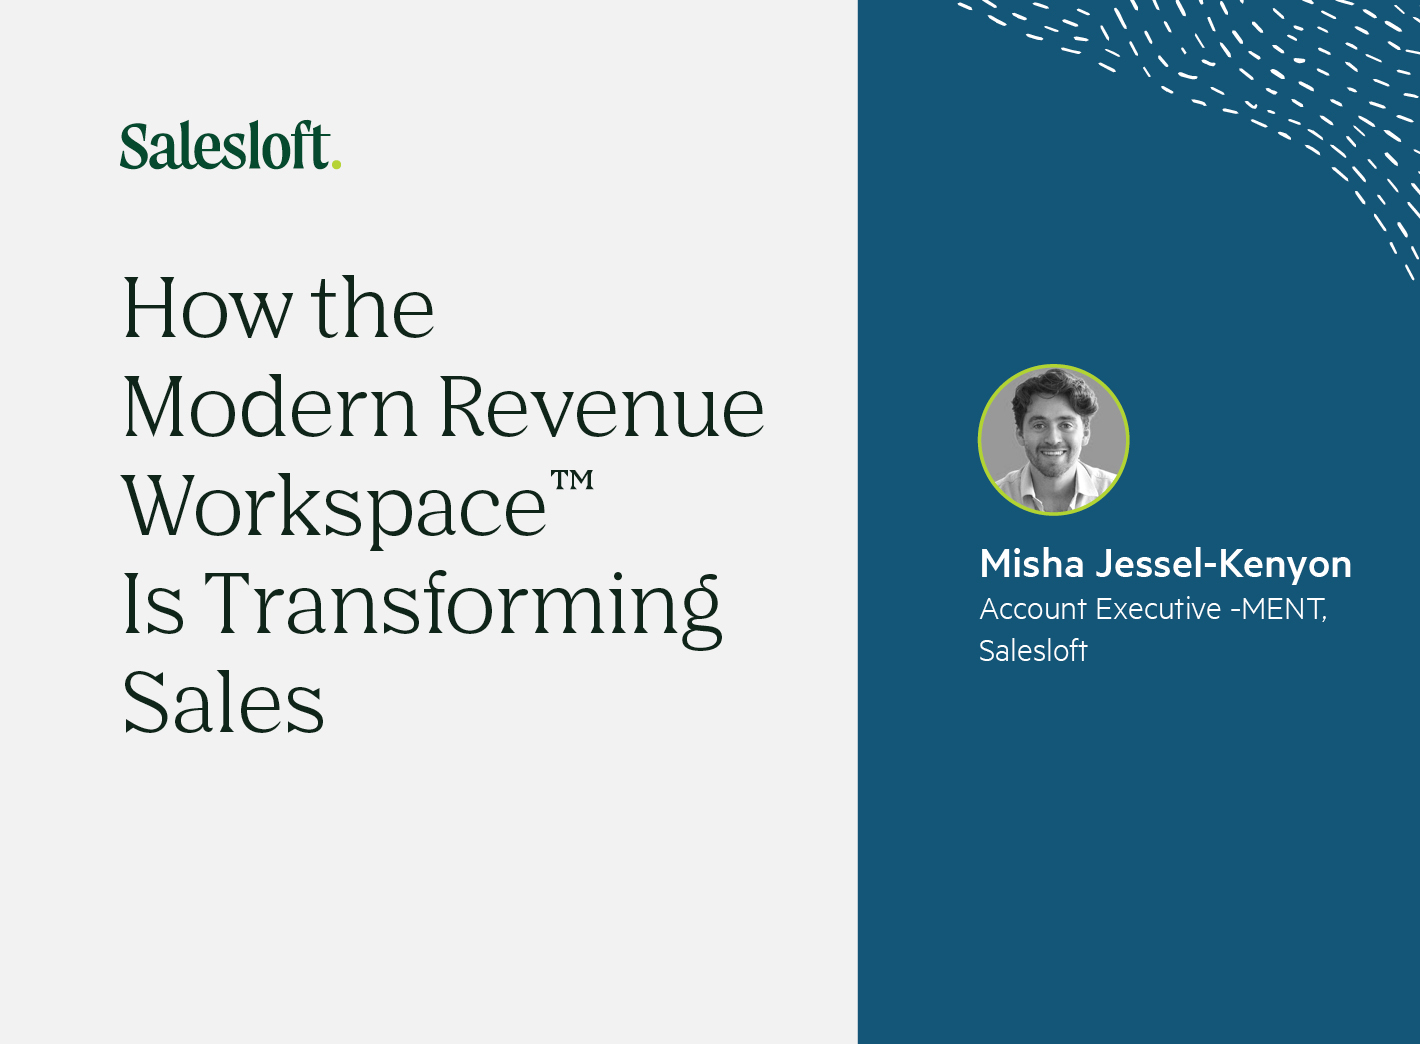 How the Modern Revenue Workspace<sup>TM</sup> Is Transforming Sales